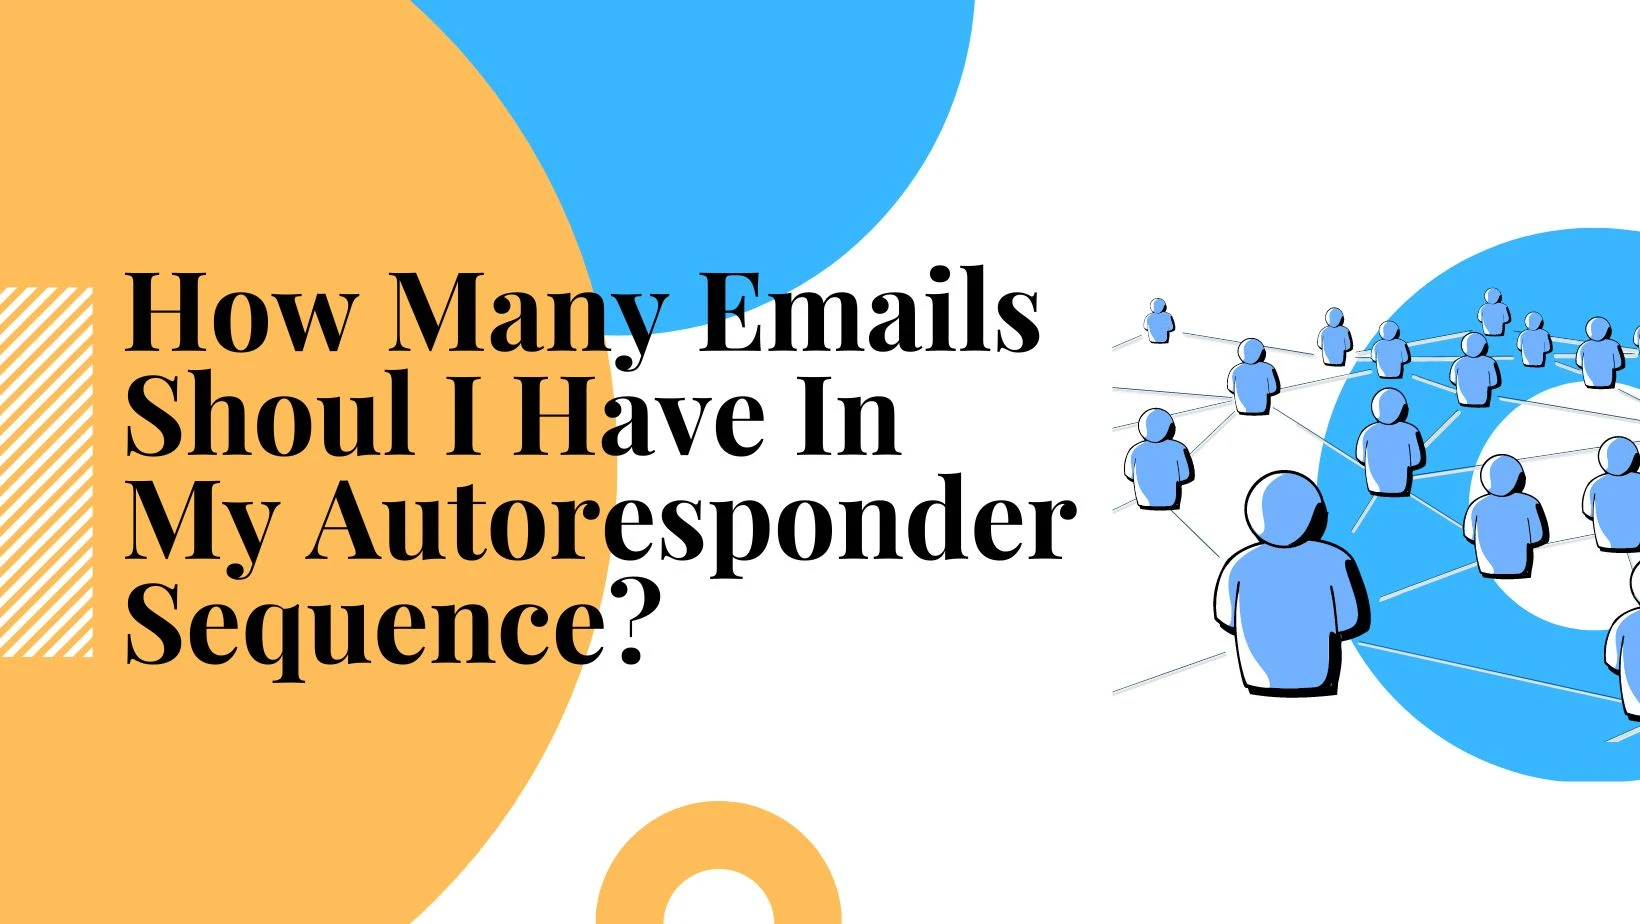 How Many Emails Should I Have In My Autoresponder Sequence?